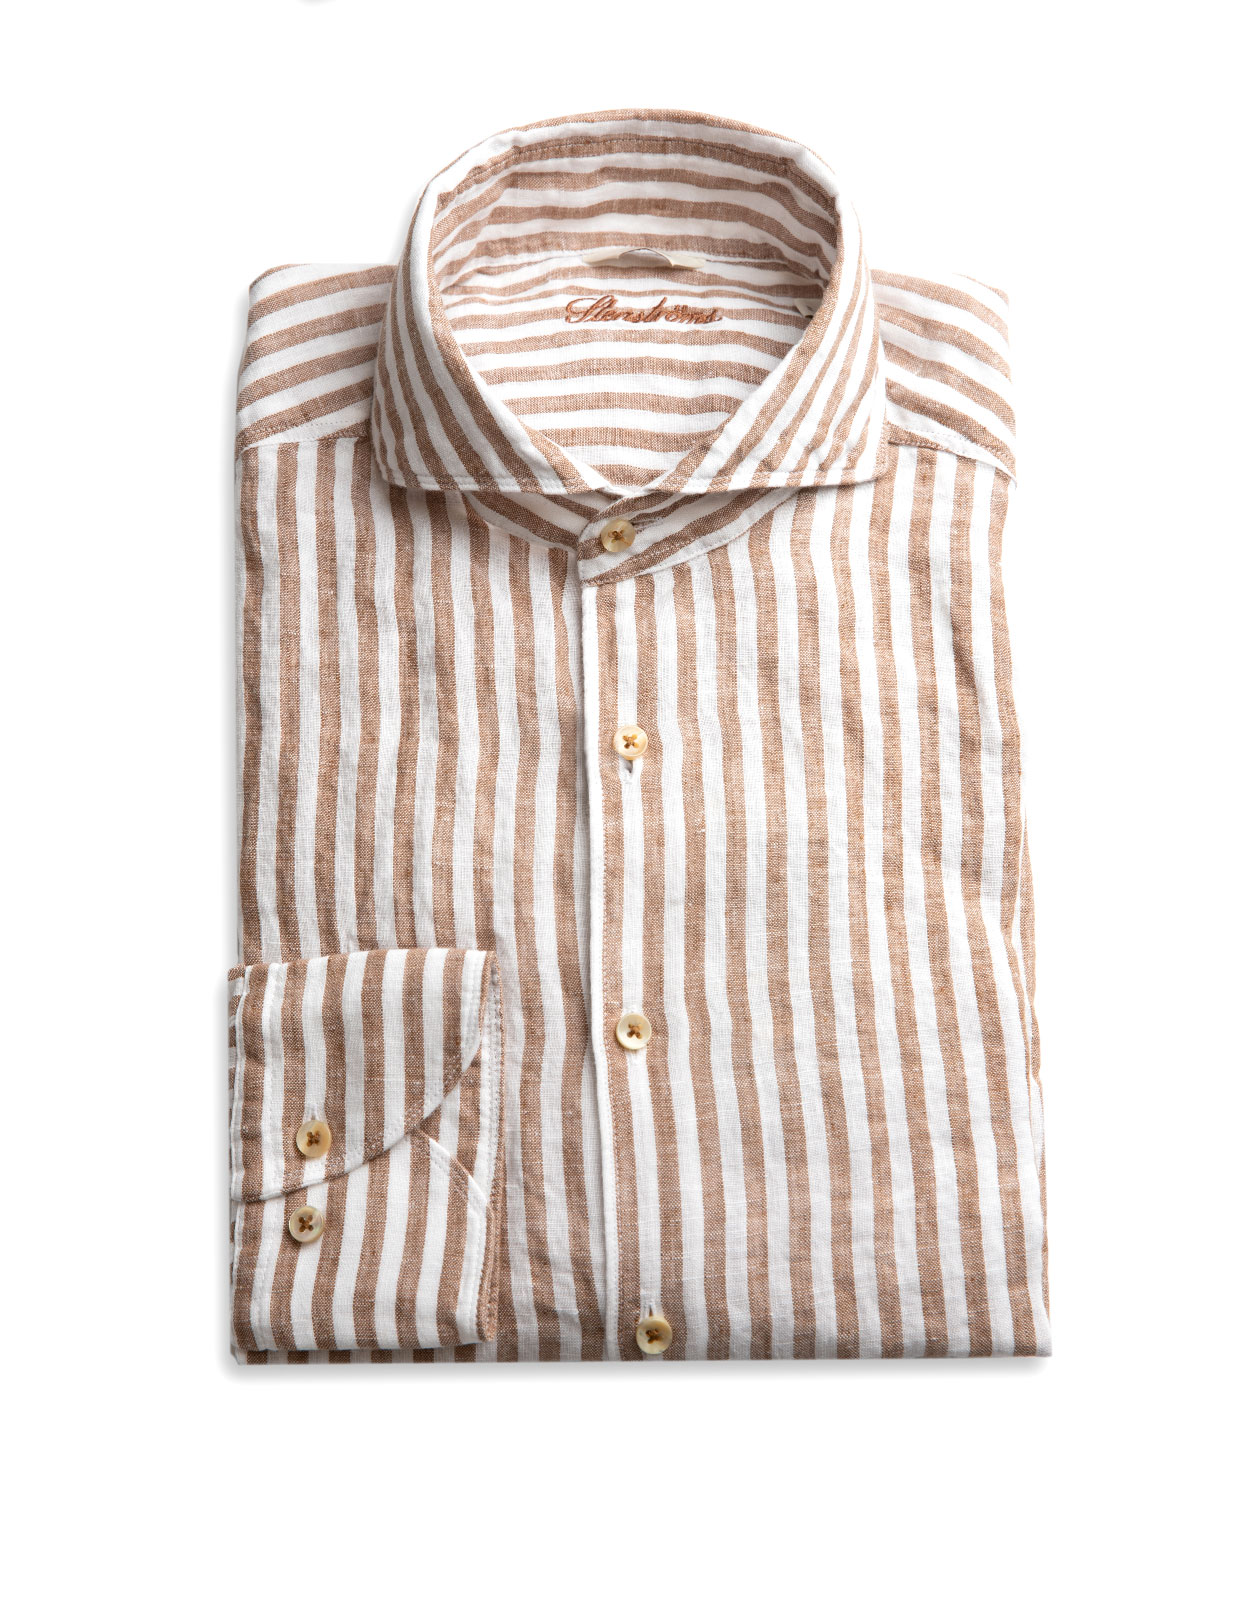 Fitted Body Shirt Striped Linen Brown/White